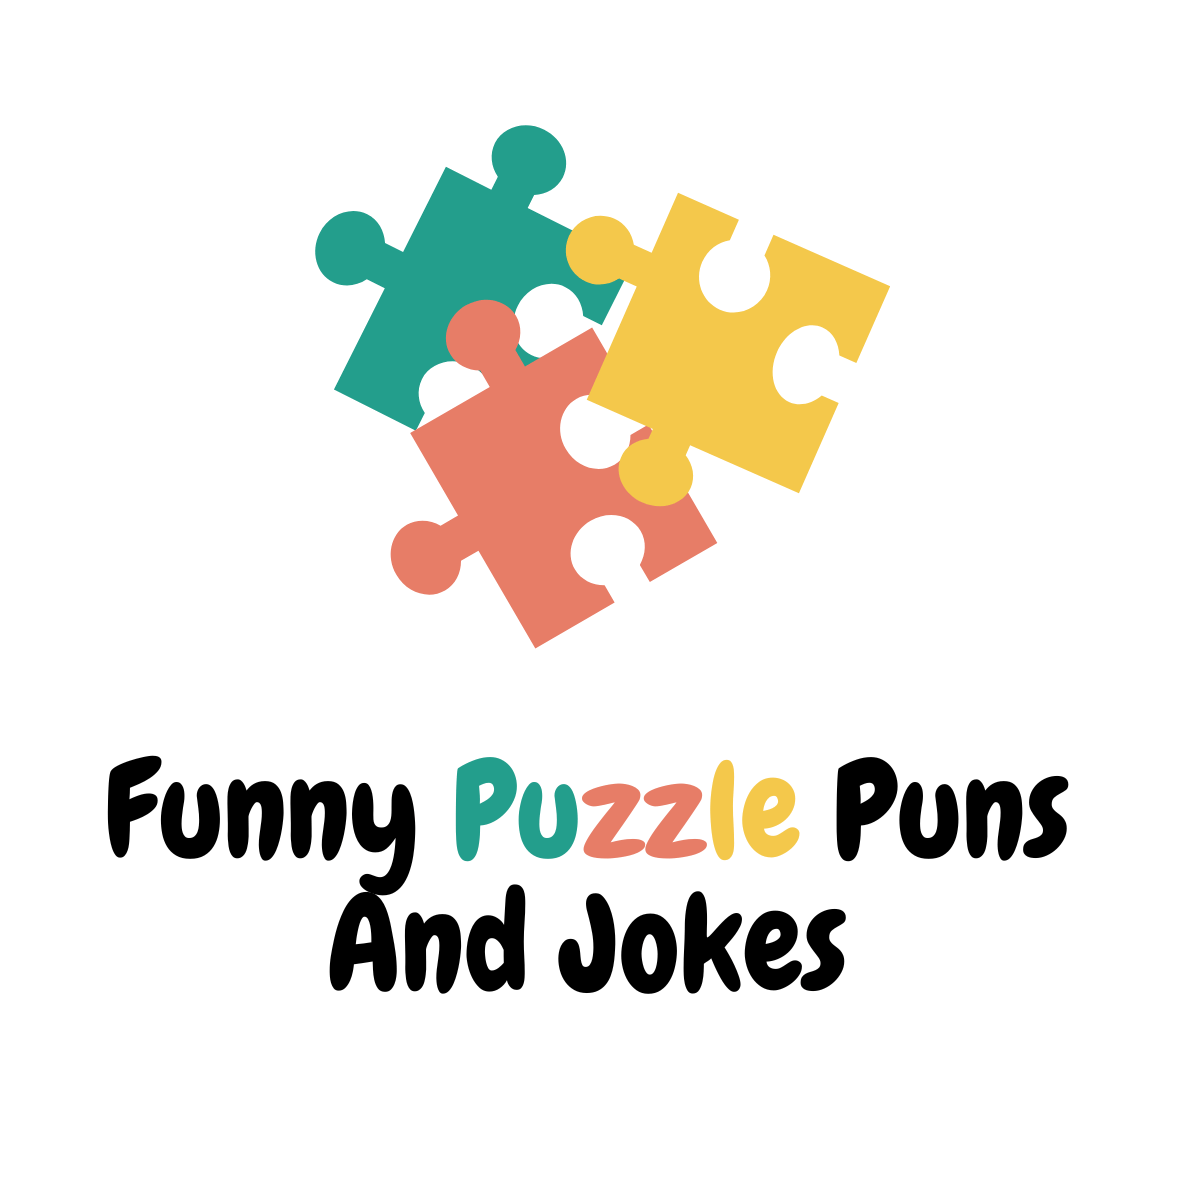 Funny Puzzle Puns And Jokes